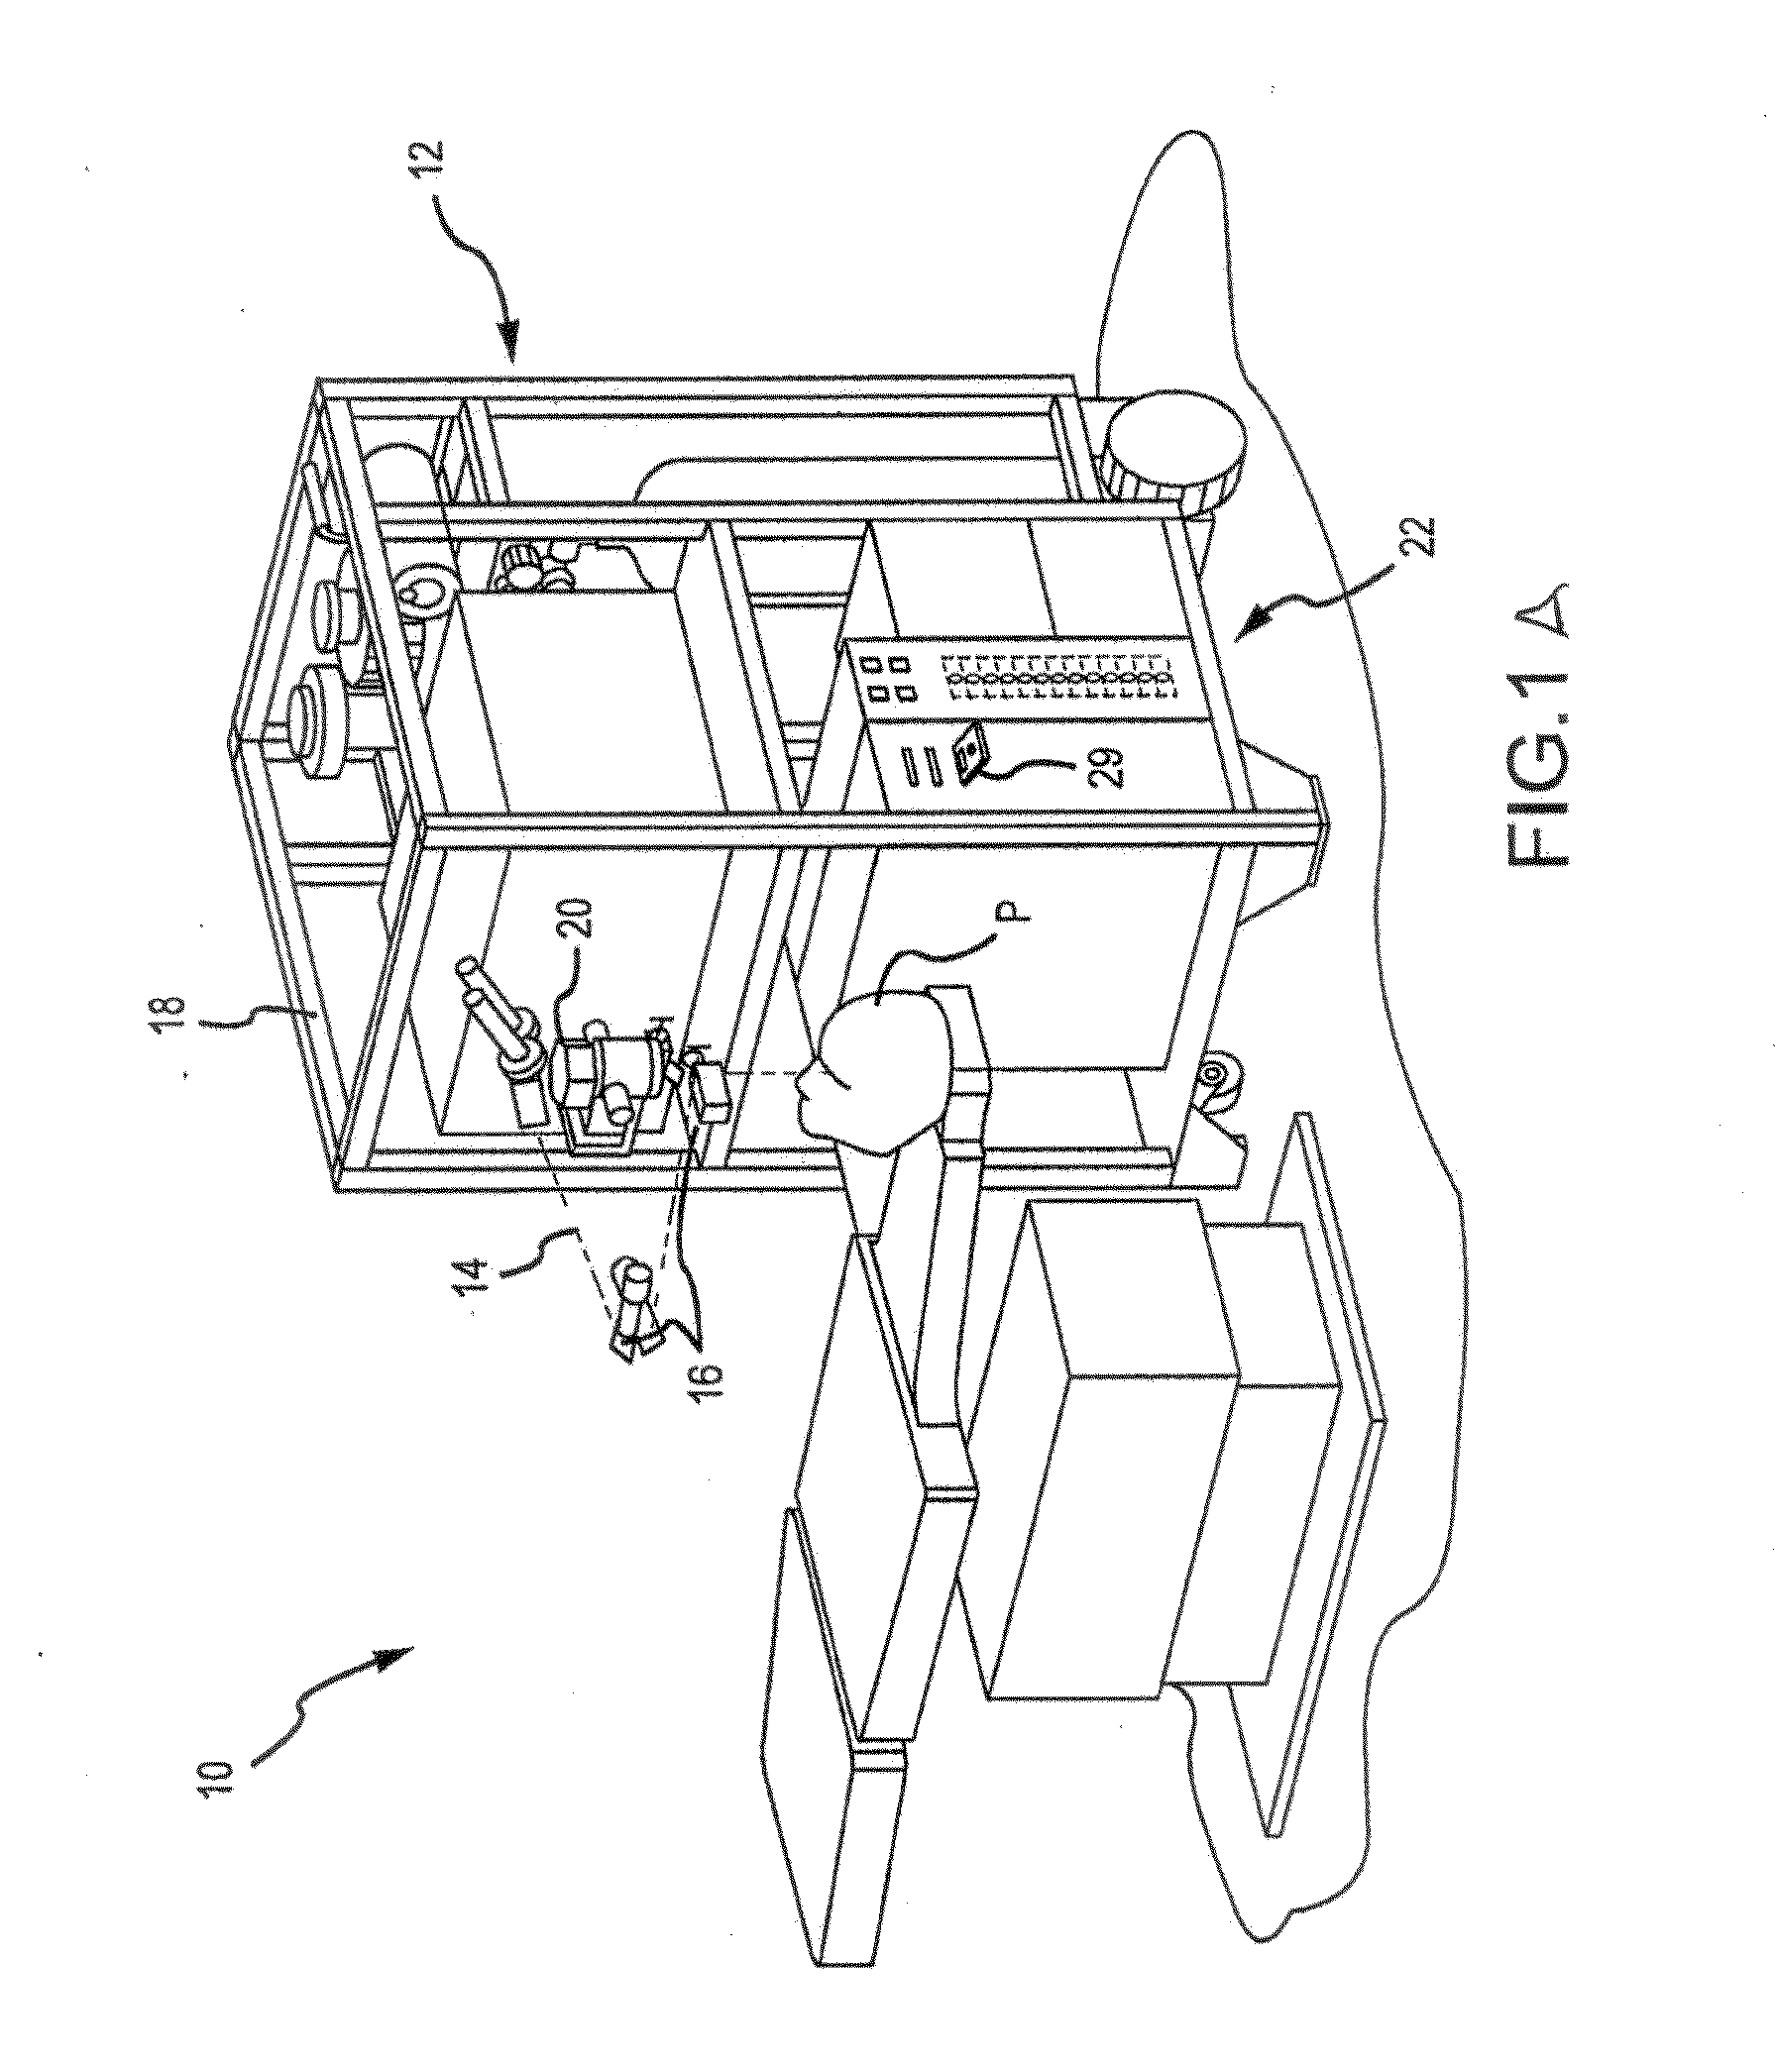 Treatment planning method and system for controlling laser refractive surgery